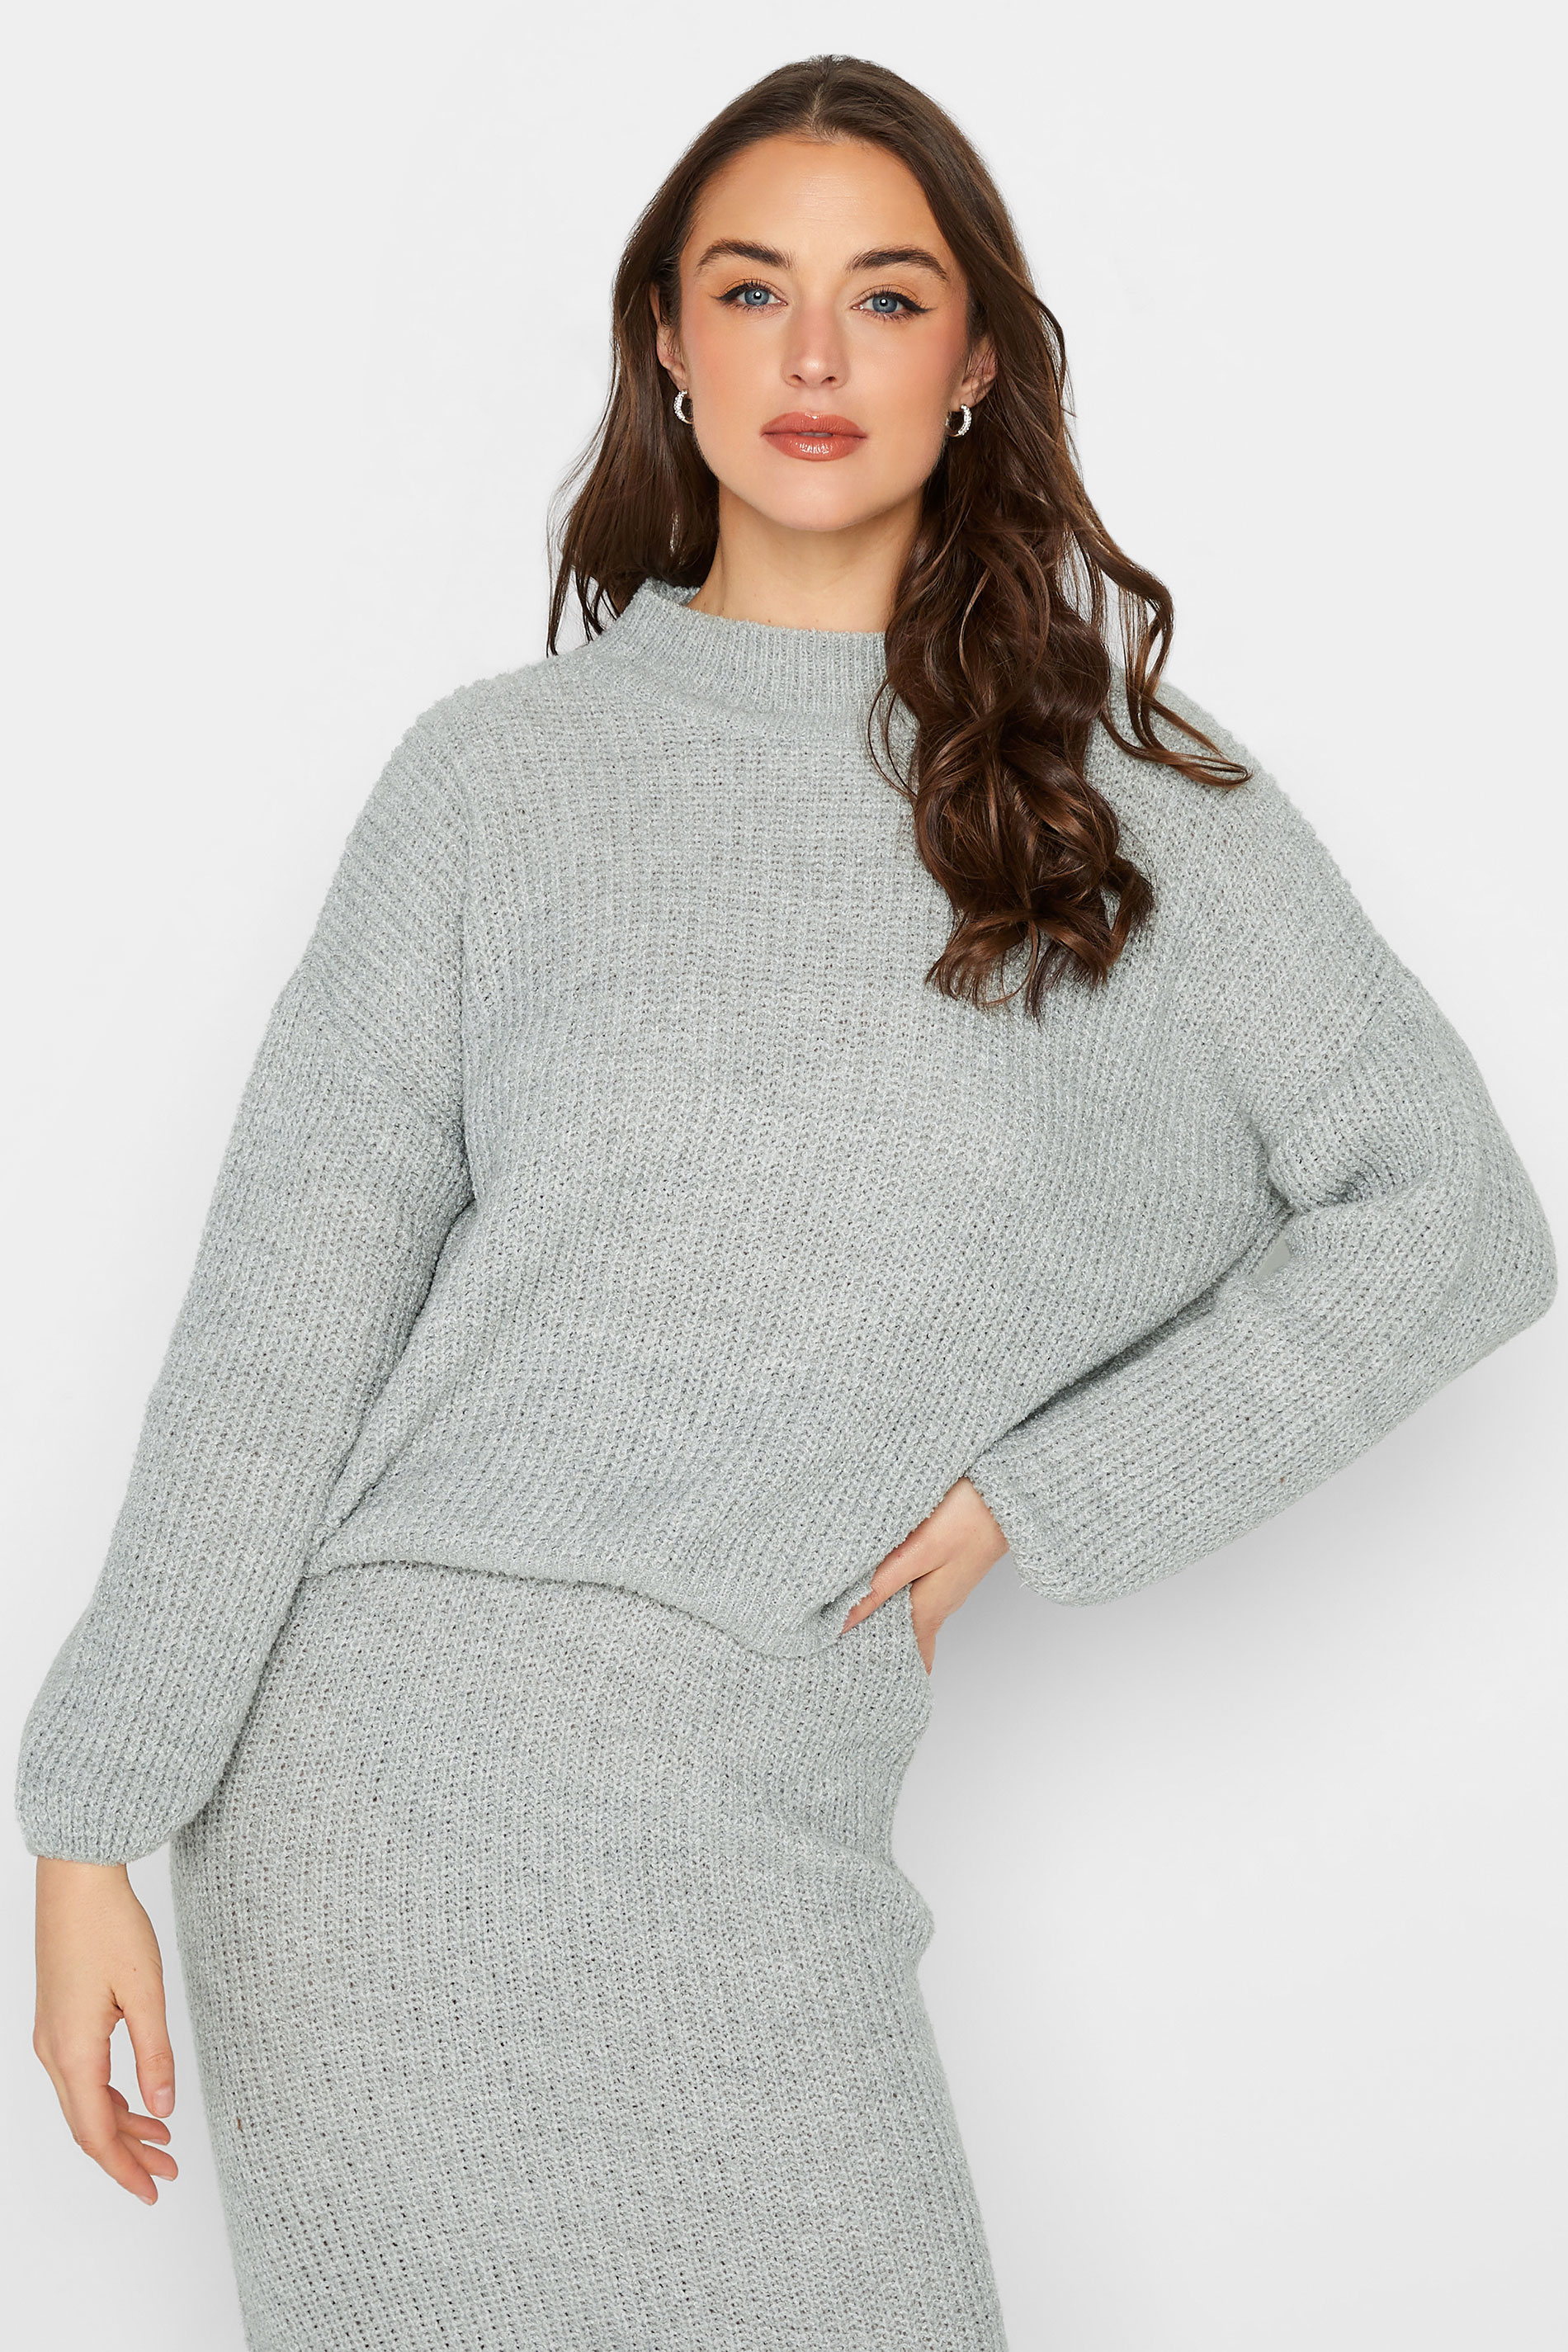 LTS Tall Grey Funnel Neck Knitted Jumper | Long Tall Sally  1